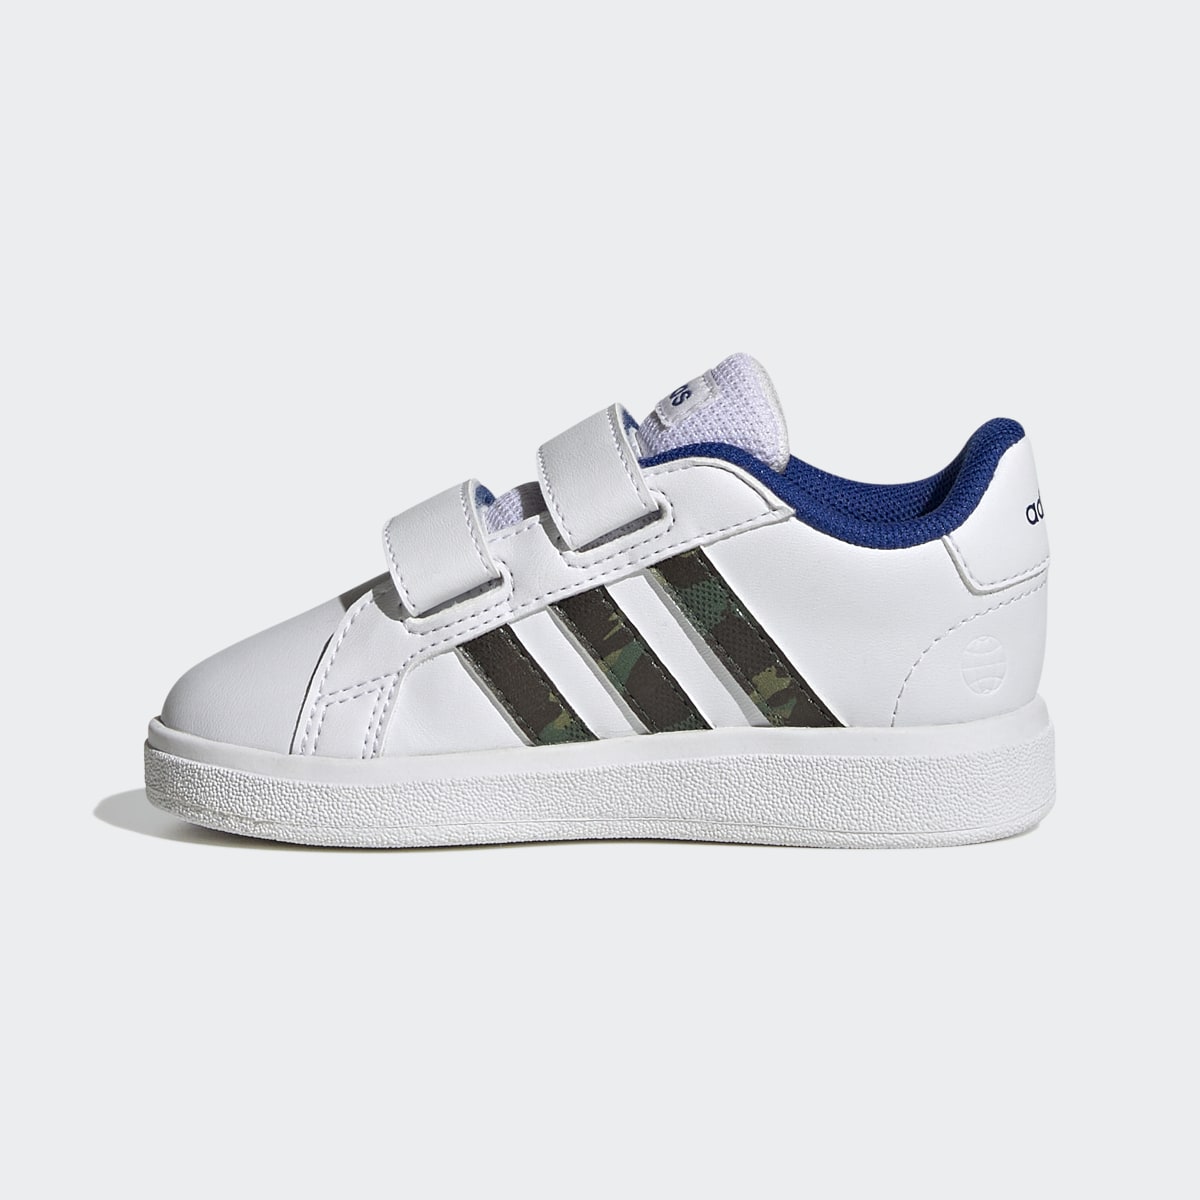 Adidas Grand Court Lifestyle Hook and Loop Schuh. 7